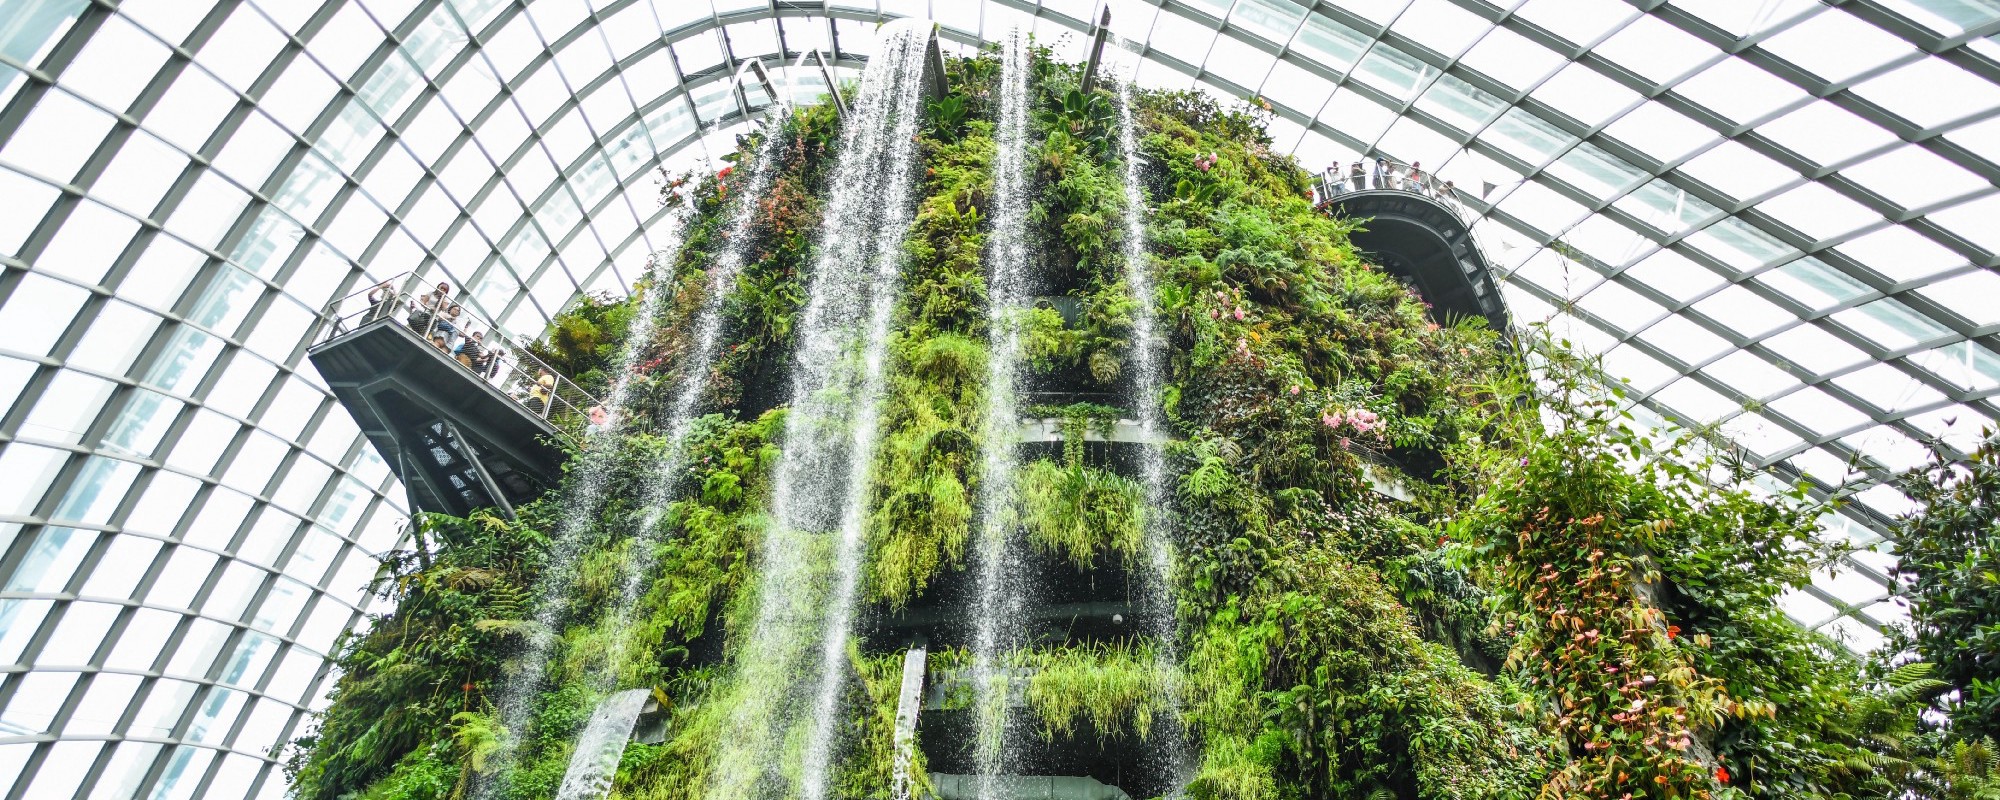 A large wall of green plants stretches up, with multiple waterpipes at the top ejecting waterfalls downwards. The entire structure is contained within a glass building.